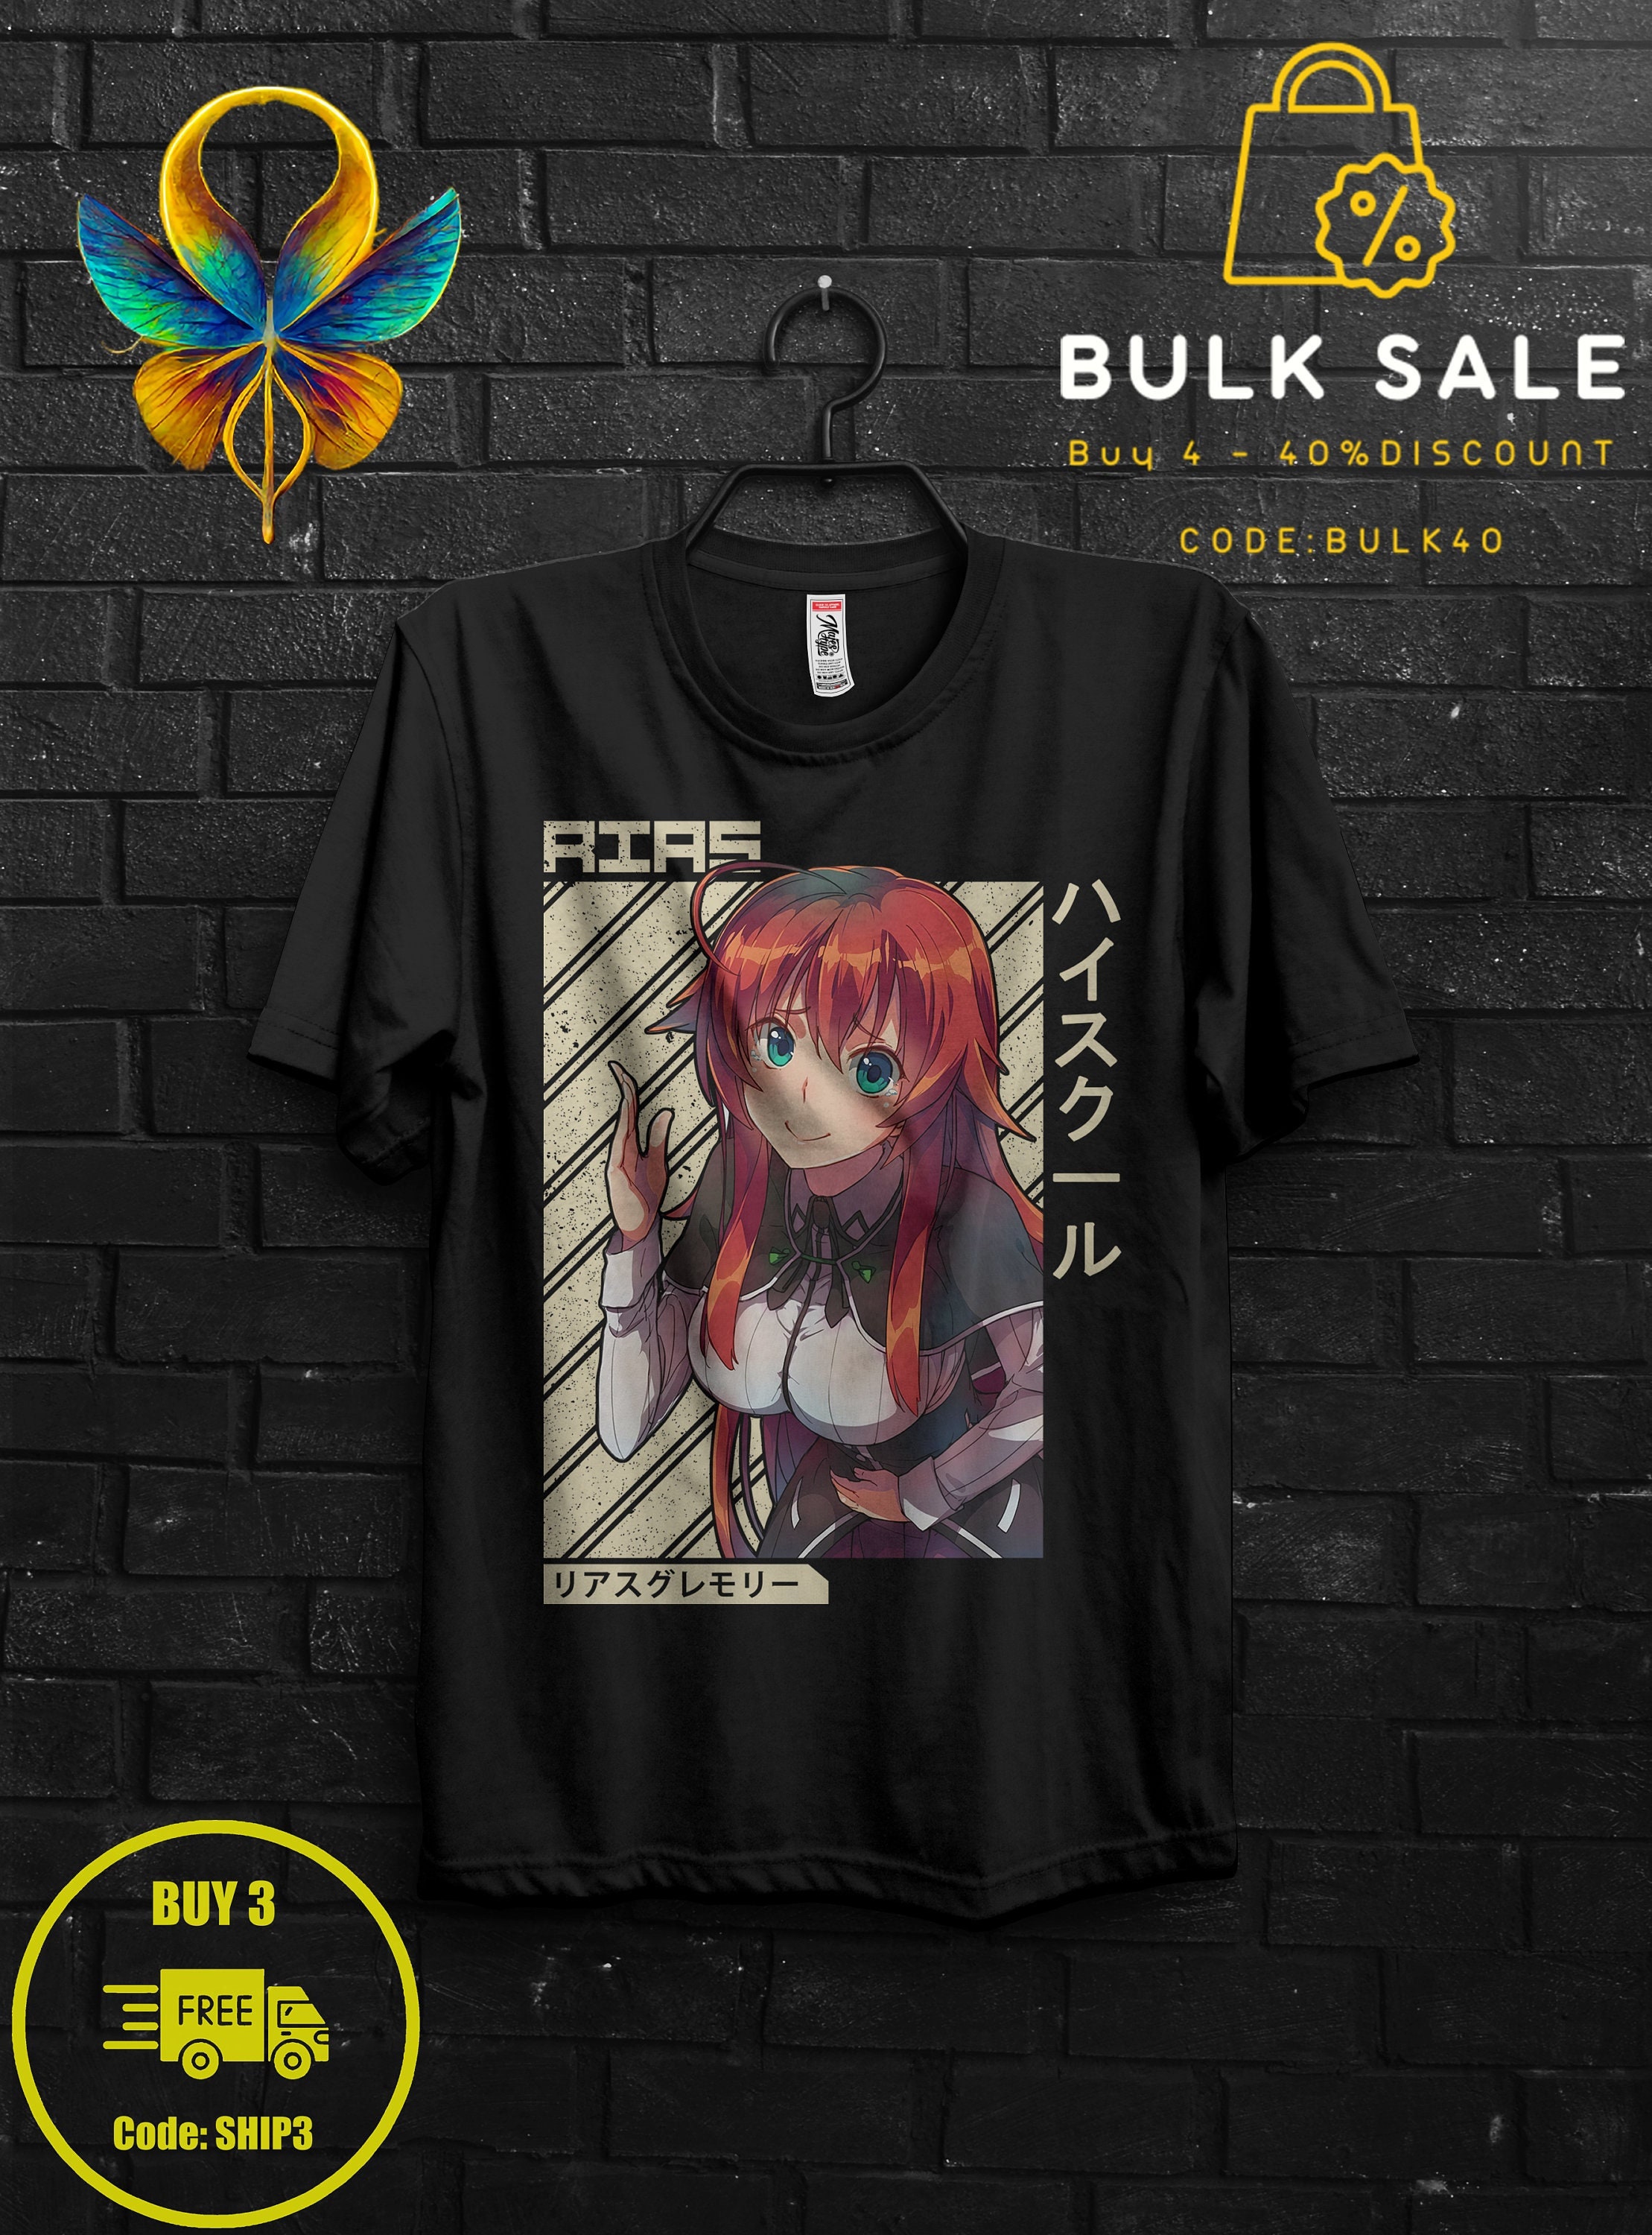 Rias Gremory Shirt Anime Gift Cosplay For Girl,Issei Hyoudou Sweat,Xenovia Appareal For Her,Rossweisse Tshirt For Sitri,High School DxD Tee 1586063512